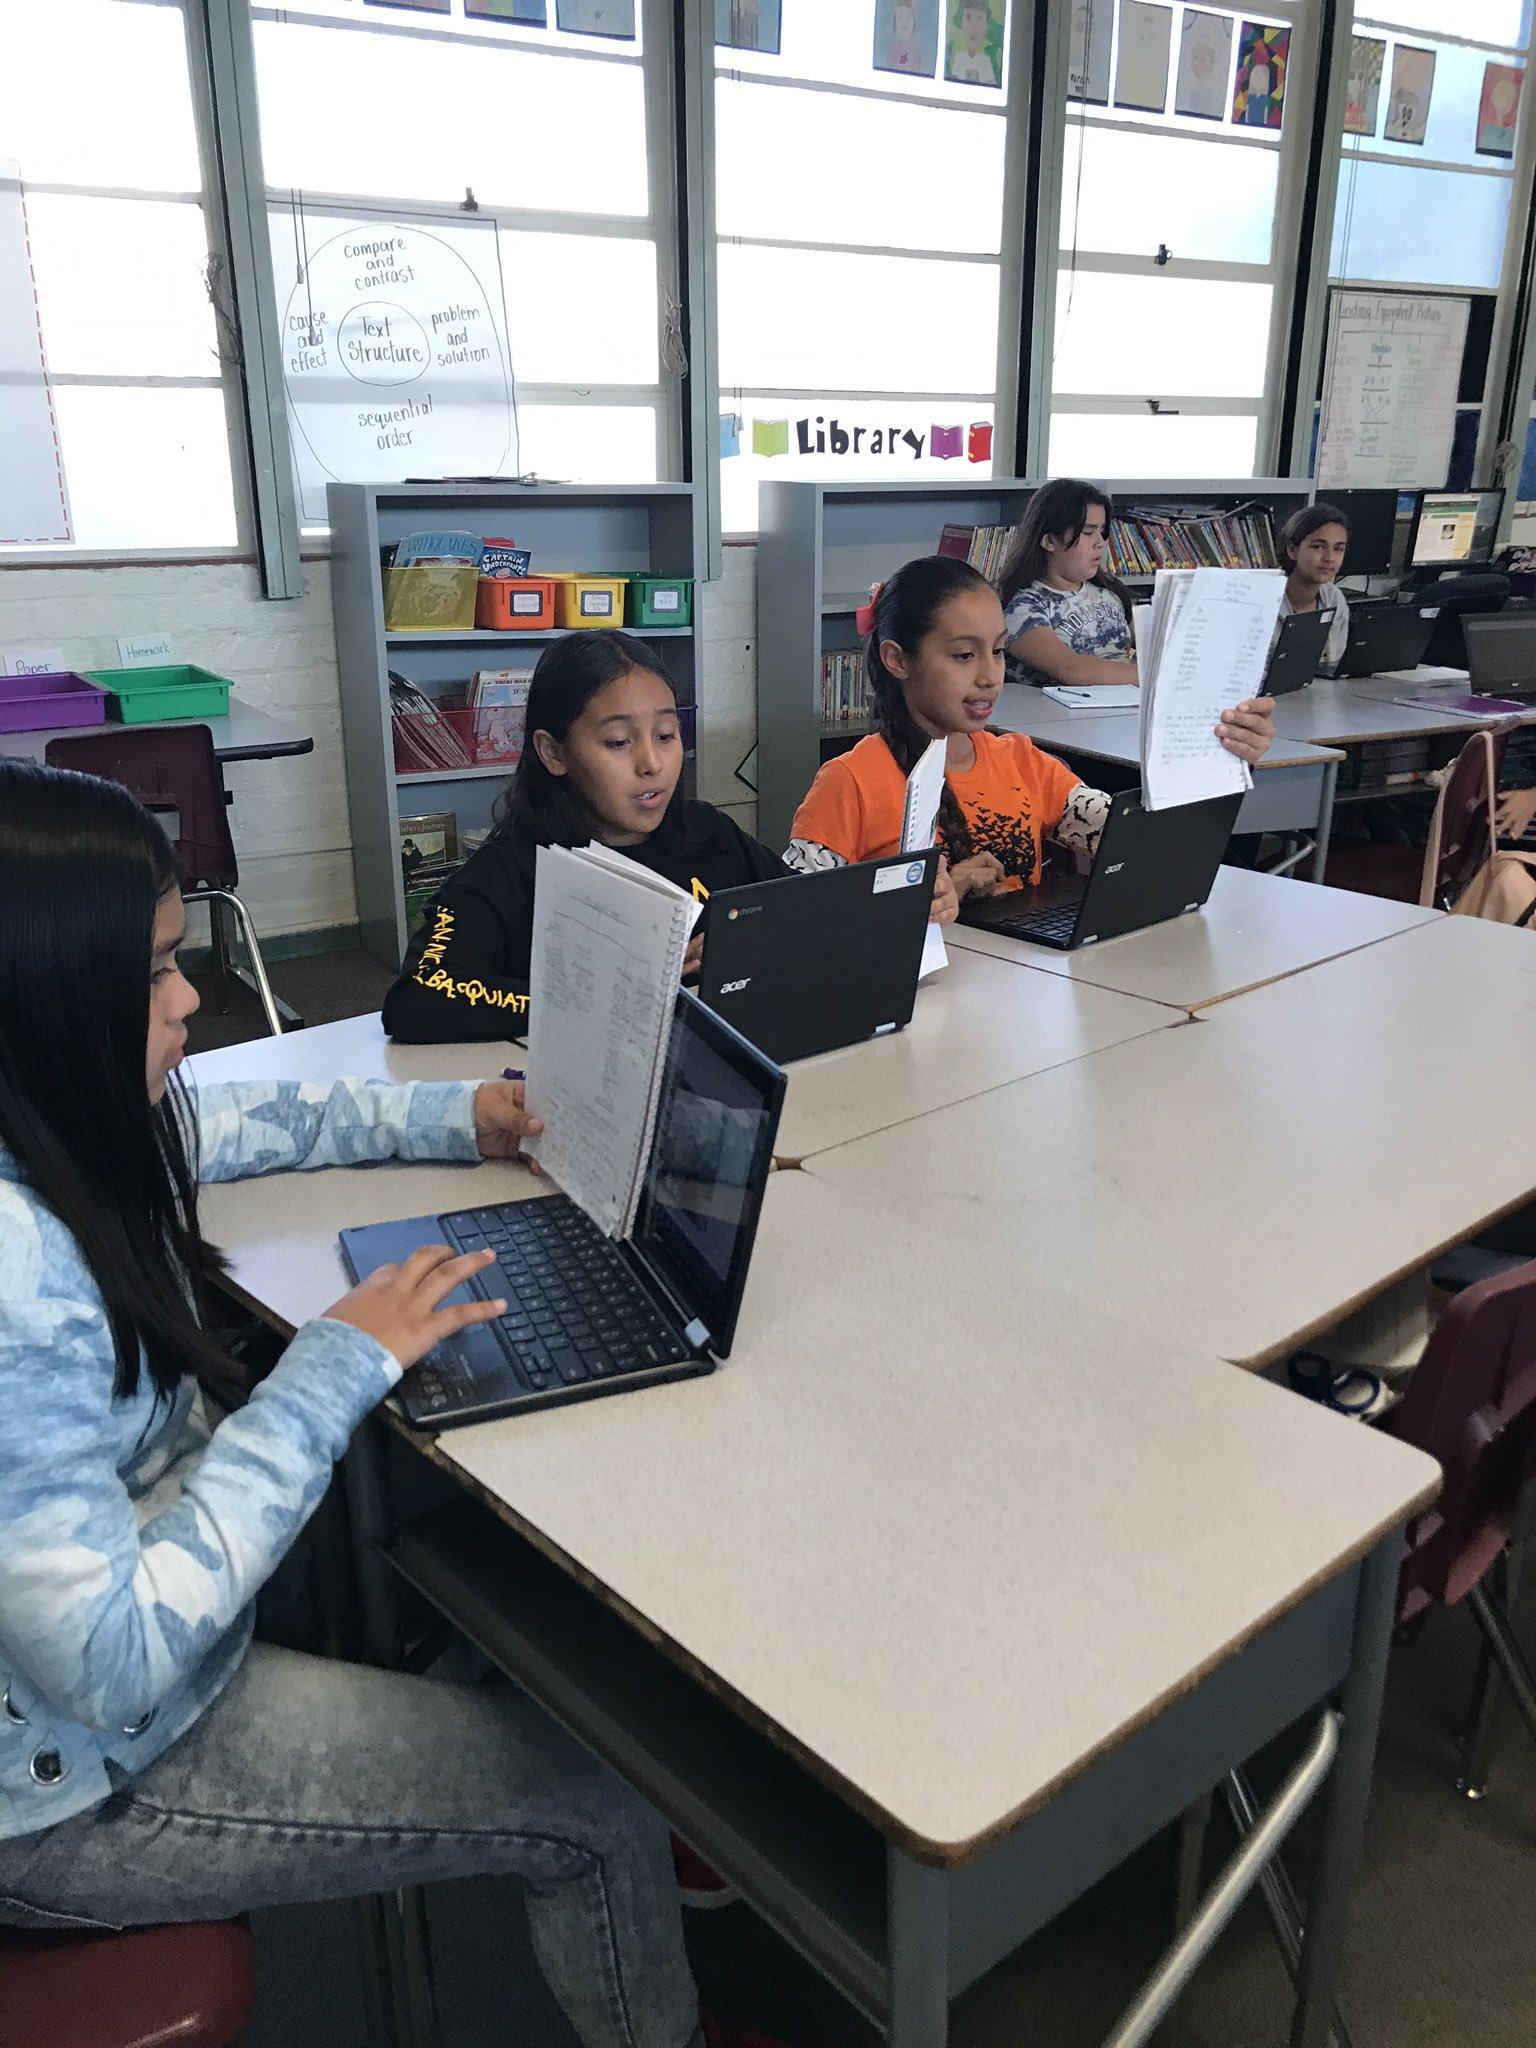 Arroyo Panthers use Flipgrid to enhance their writing, listening and speaking skills in language Acquisition! Thank you Ed Tech for leading our scholars and preparing them for college and beyond!